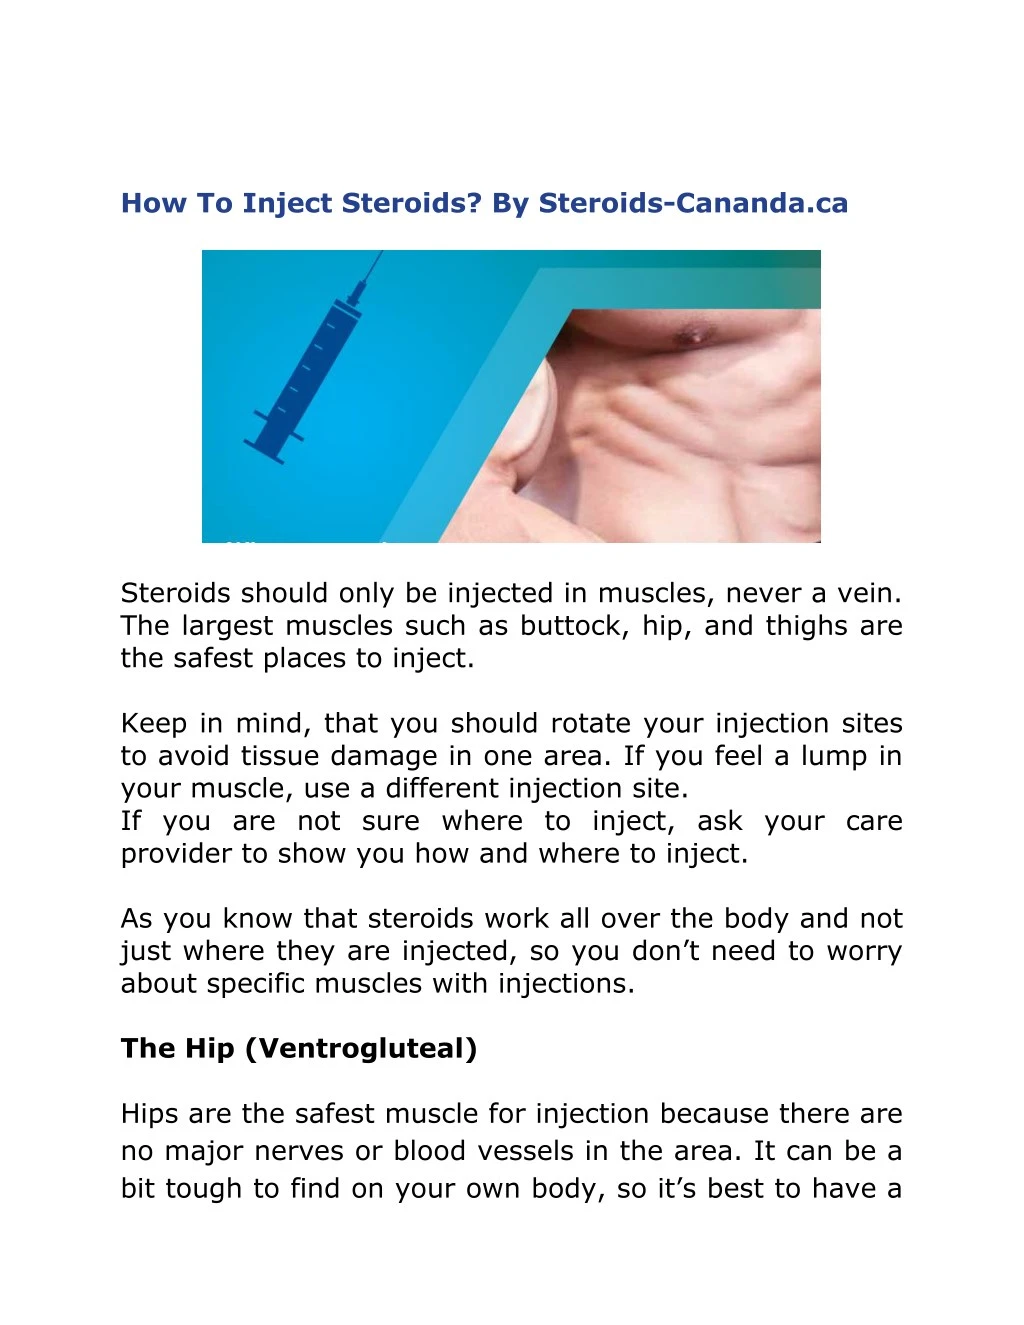 how to inject steroids by steroids cananda ca